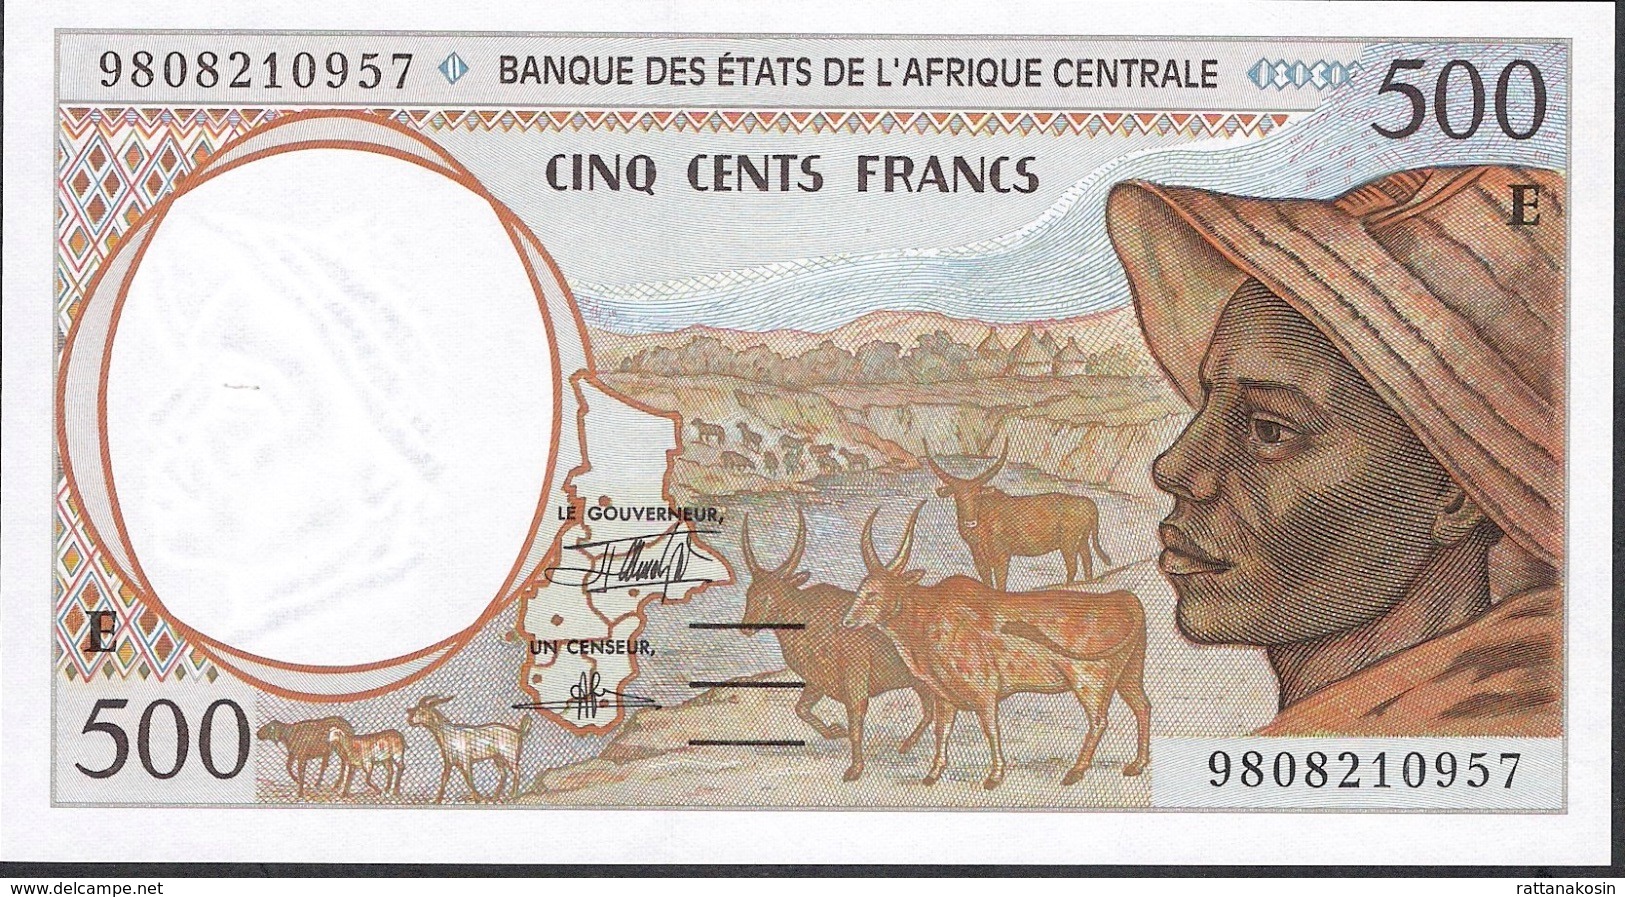 CENTRAL AFRICAN STATES Letter E P201Ee 500 FRANCS (19)98 UNC. - Centraal-Afrikaanse Staten